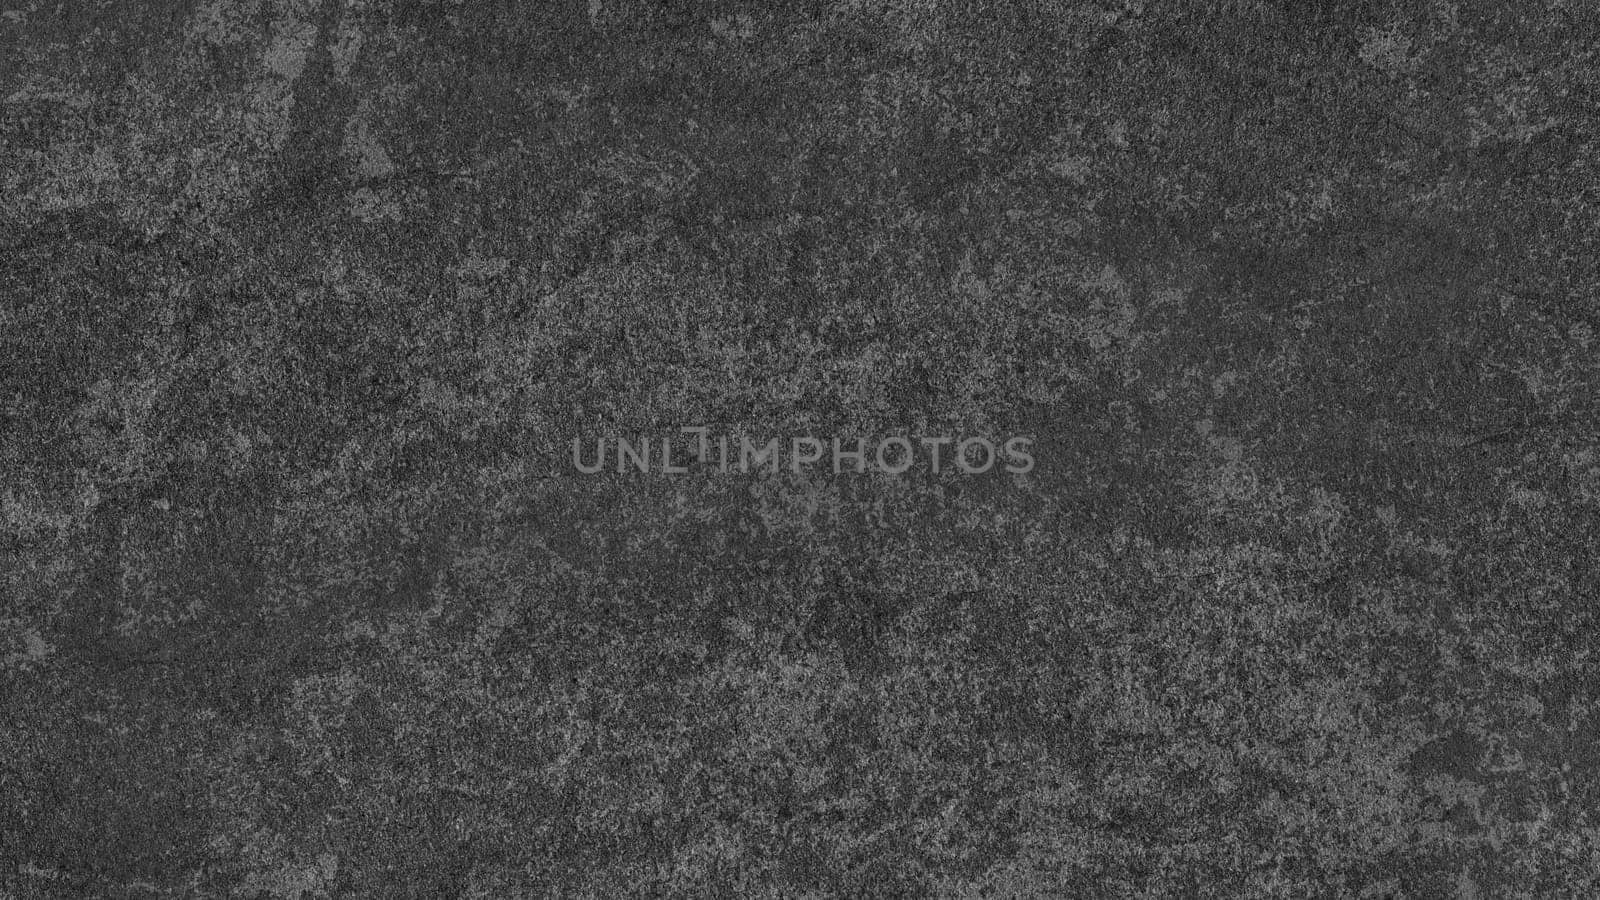 Black textured paper background. Hand painted abstract image. High quality photo